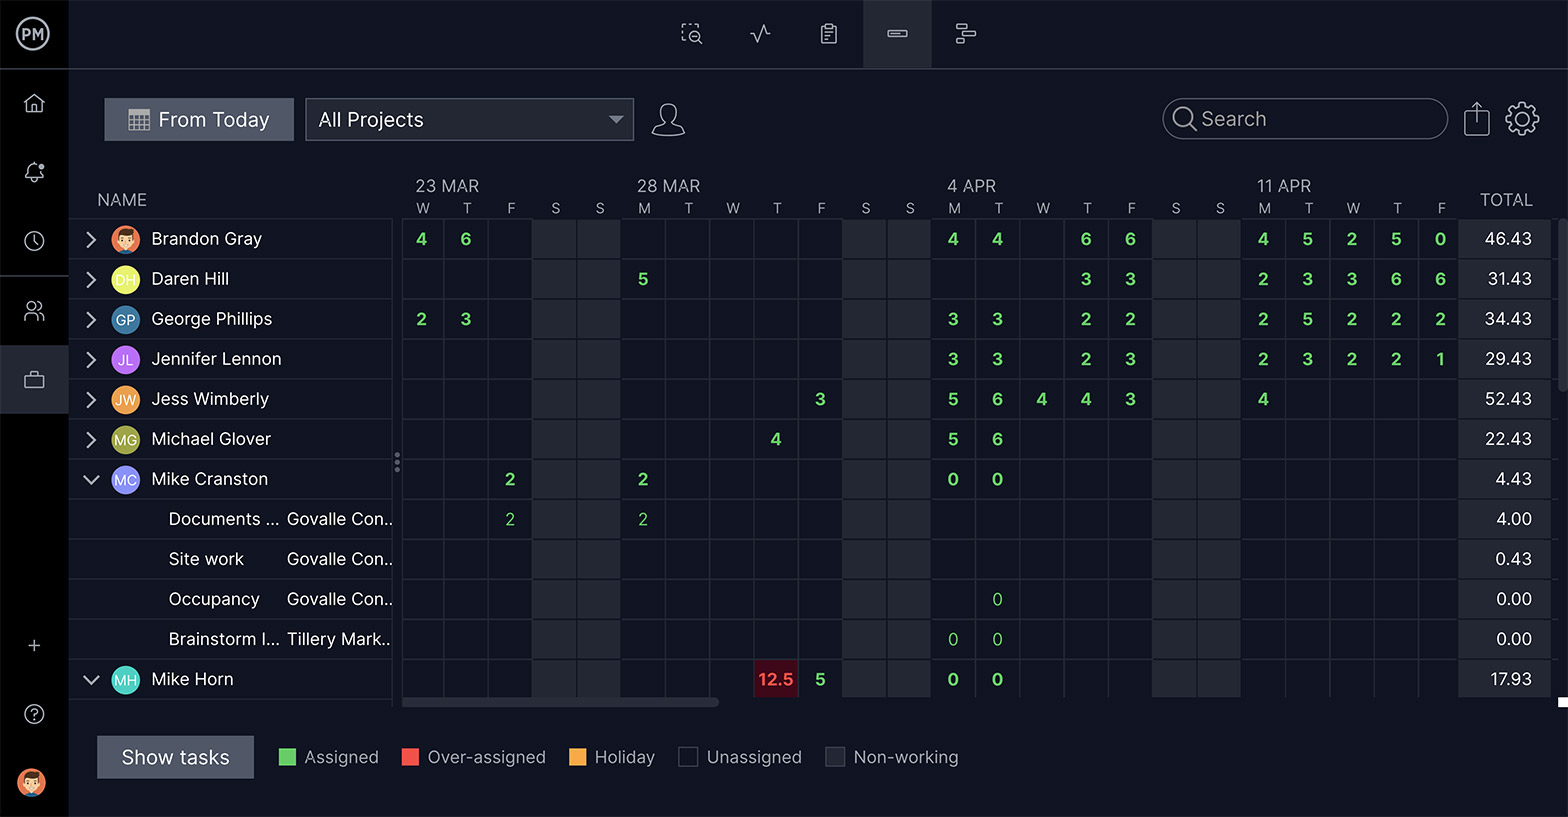 A screenshot of the Overview Workload chart, which shows team members and the amount of tasks they're assigned to